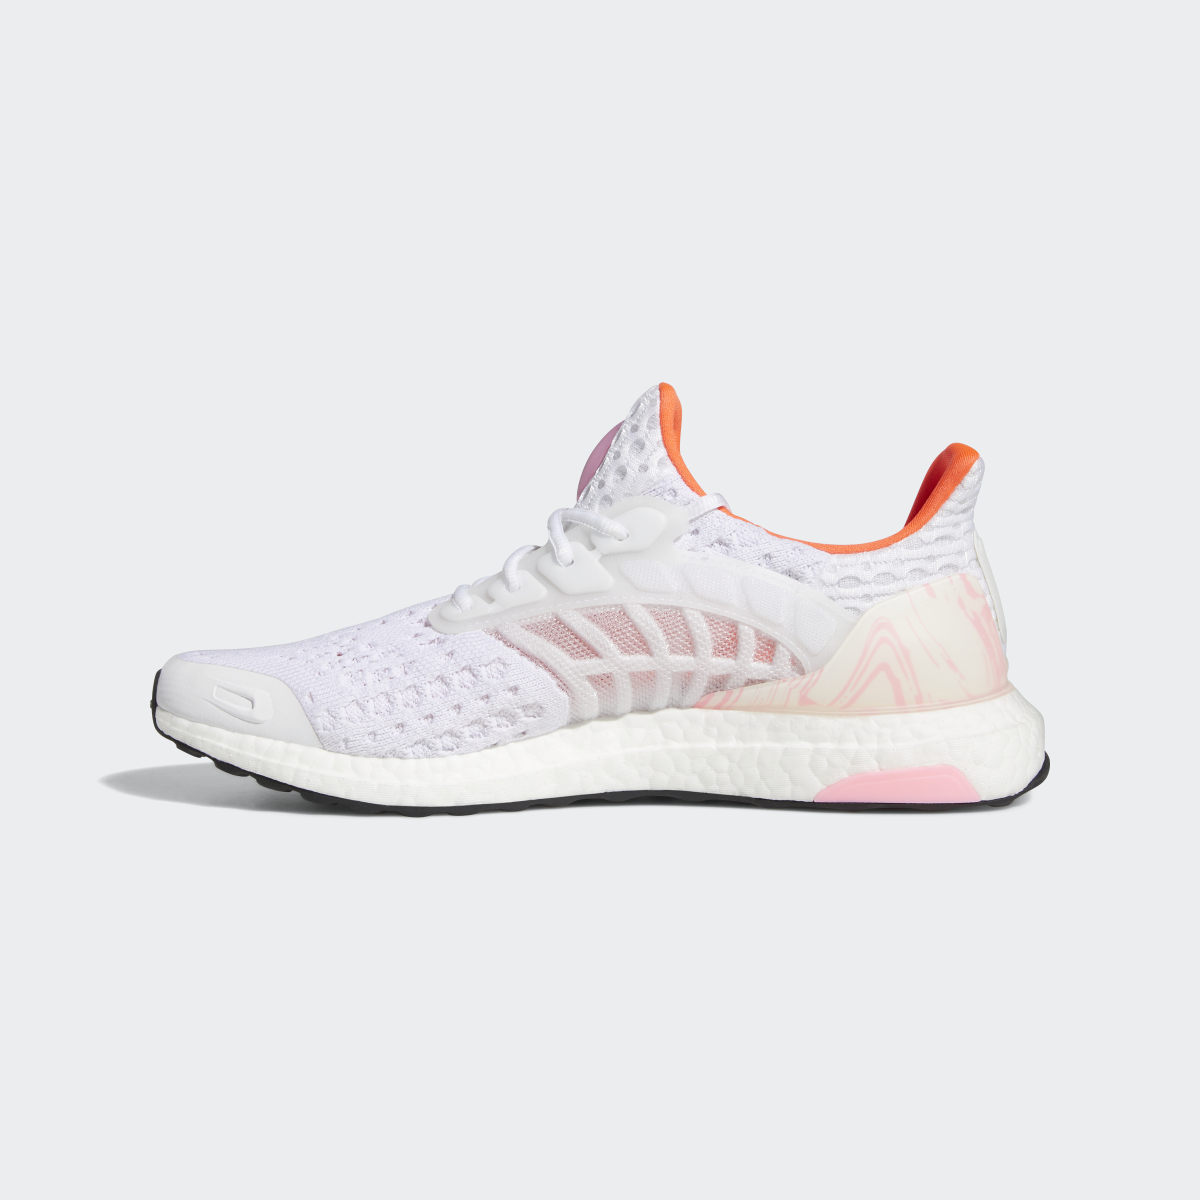 Adidas Chaussure Ultraboost CC_2 DNA Climacool Running Sportswear Lifestyle. 10